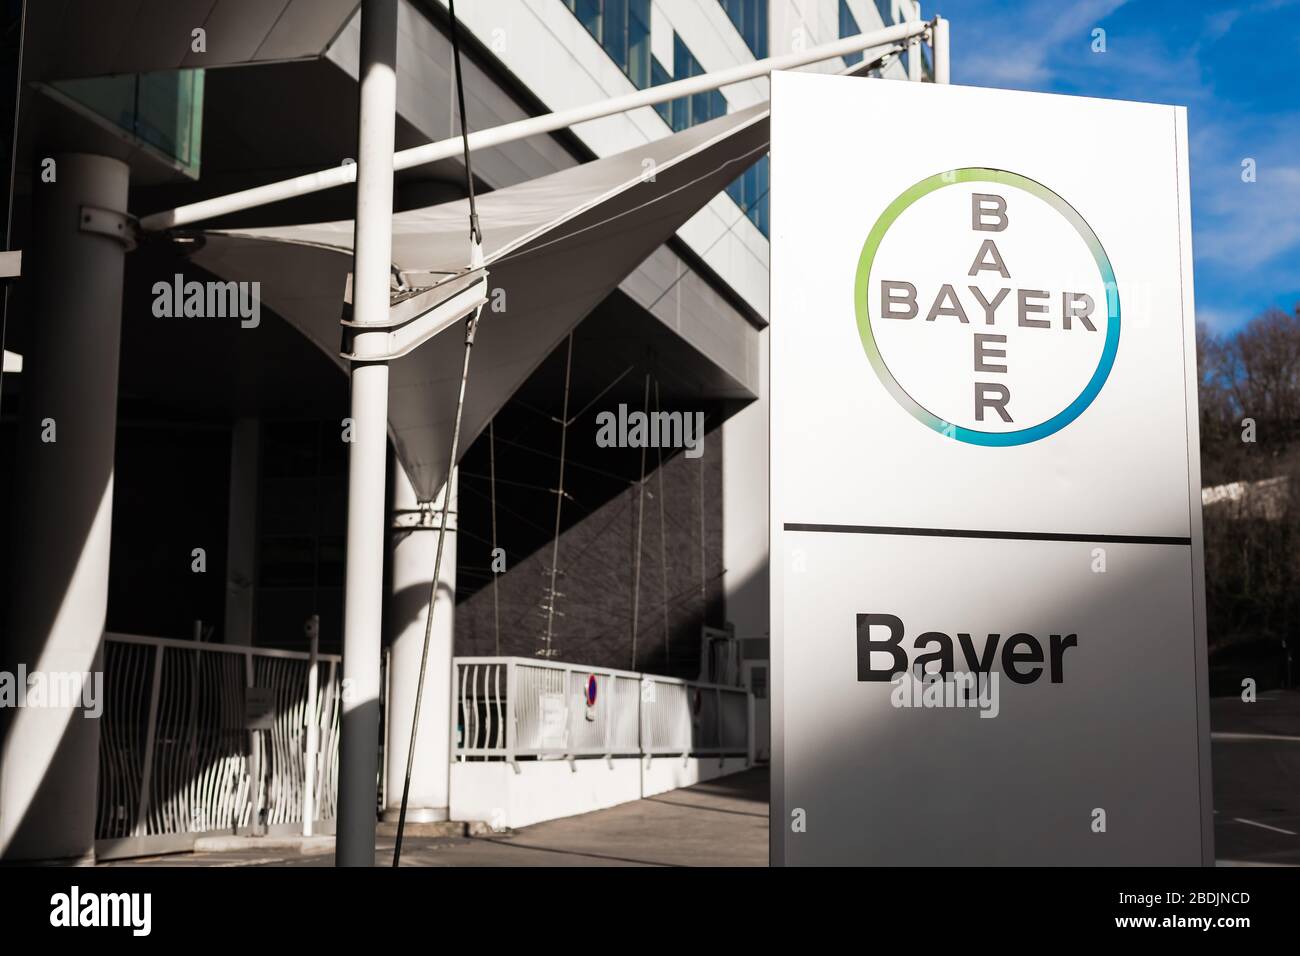 Bayer AG, German multinational pharmaceutical and life sciences company, one of largest pharmaceutical companies in world brand, logo on its office bu Stock Photo